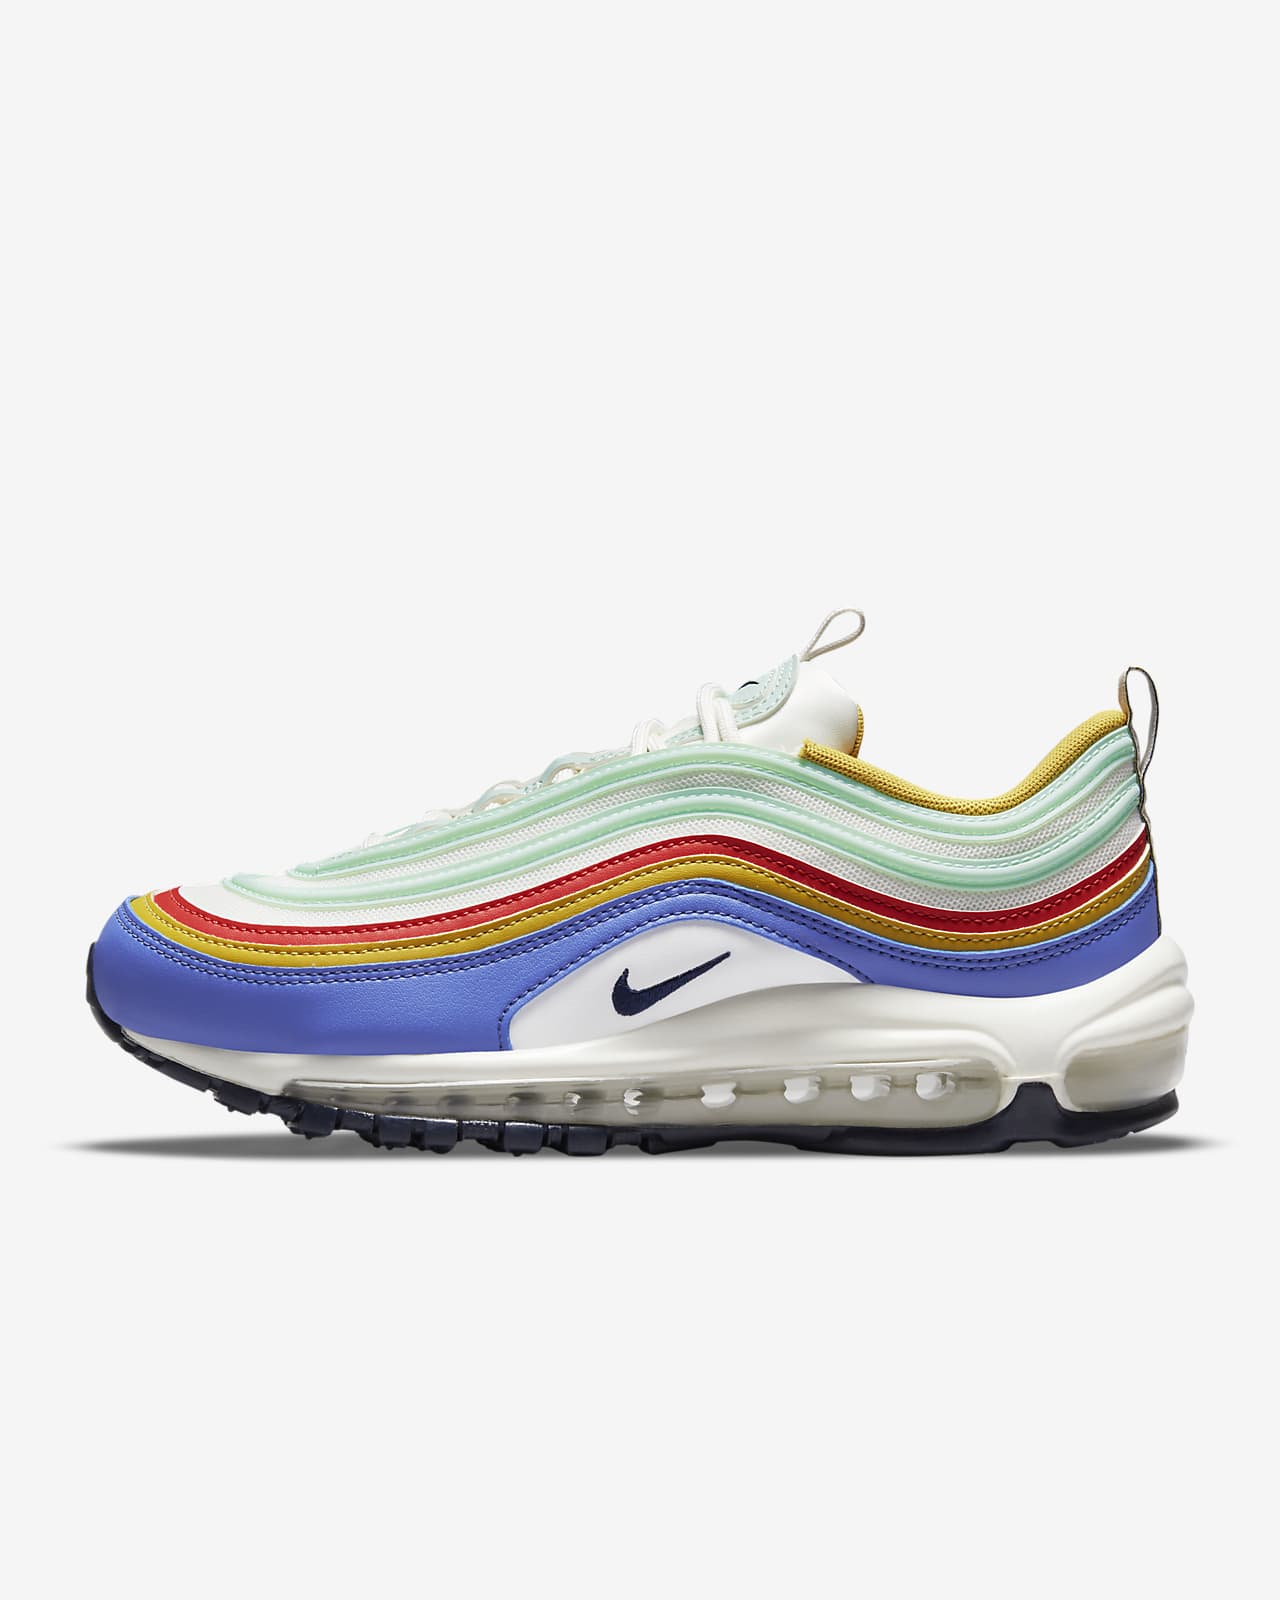 Women’s Nike Air Max 97 ‘Pistachio Frost’ 3.97 Free Shipping